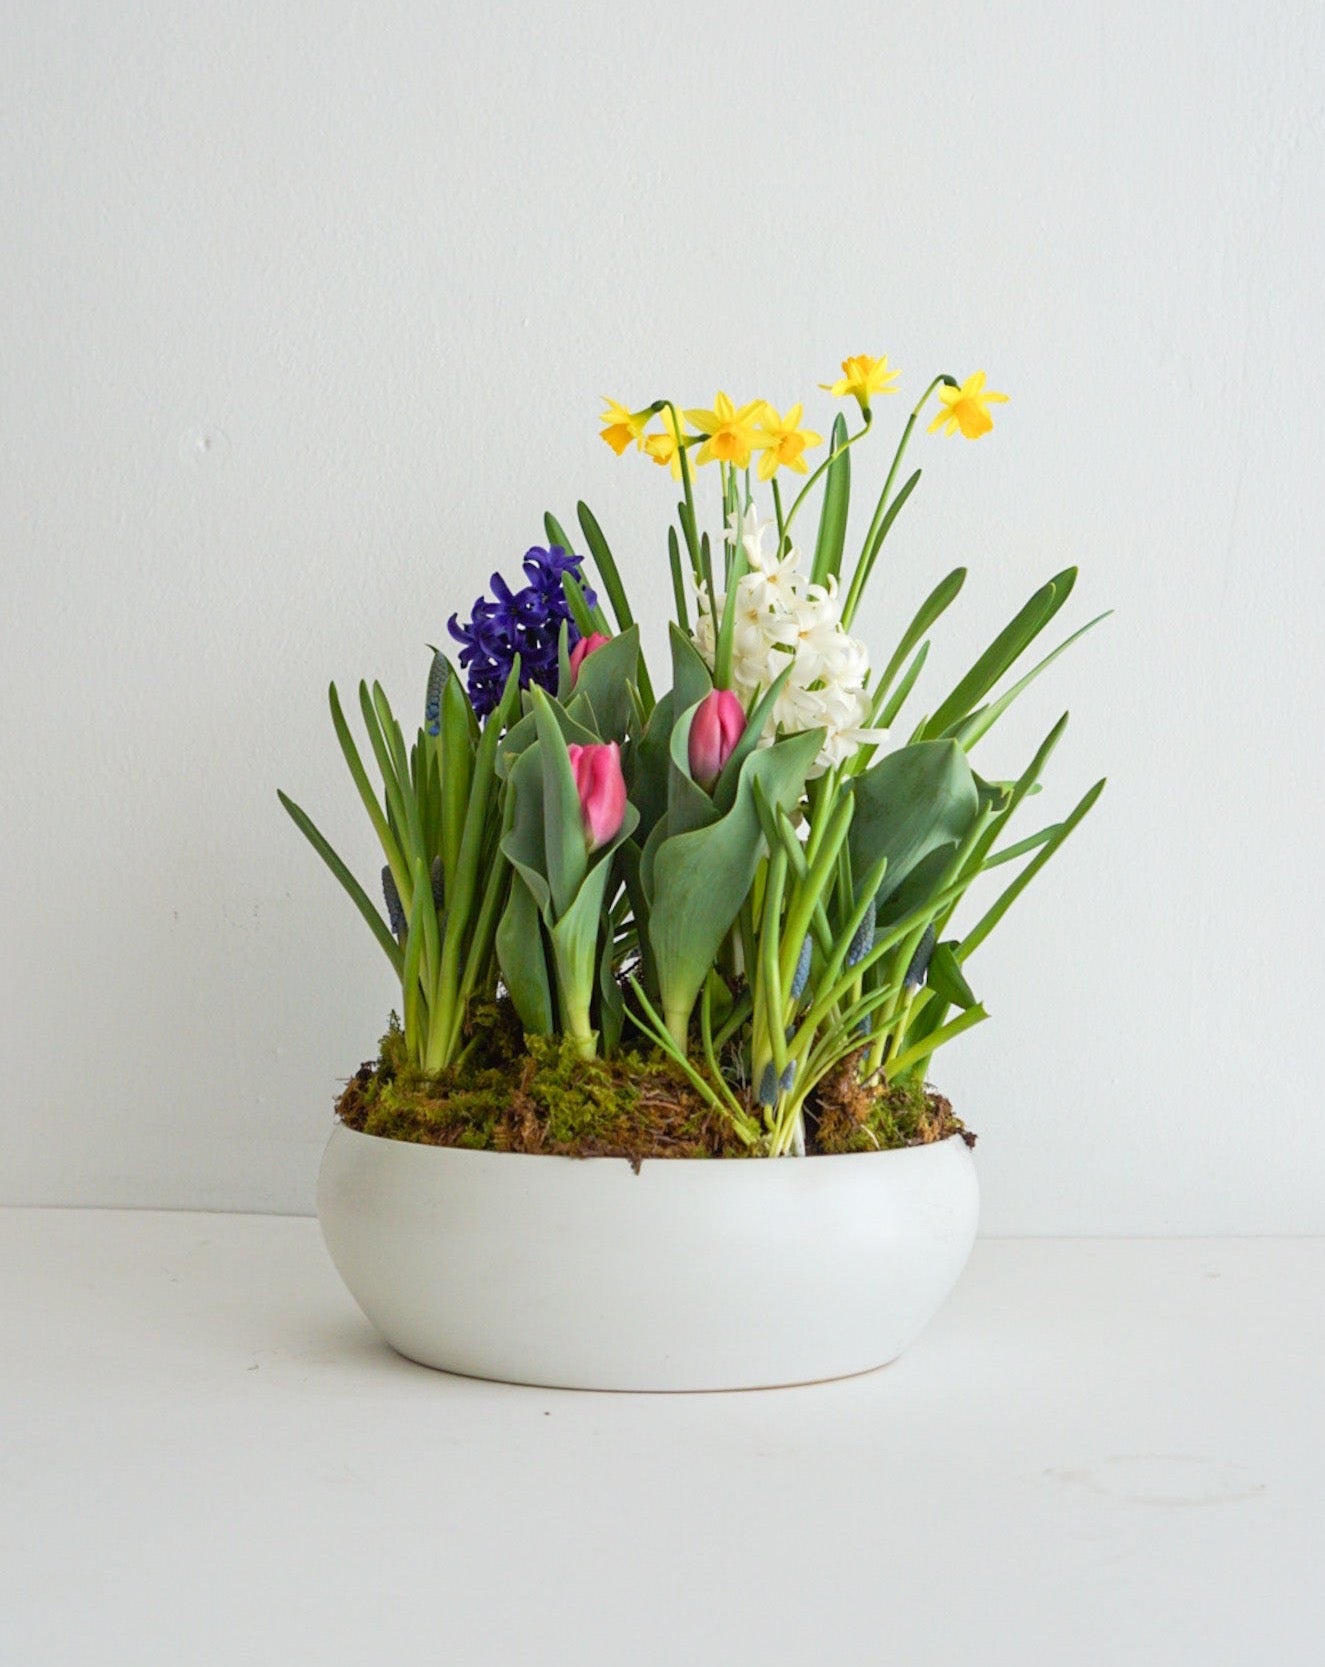 All spring bulbs in one planter - Tulips, Hyacinth, Daffodil, Muscari, arranged in a shallow white ceramic bowl. These fun potted bulbs is a wonderful way to cheer up someone you love or brighten your own entryway. Also, a great housewarming gift!